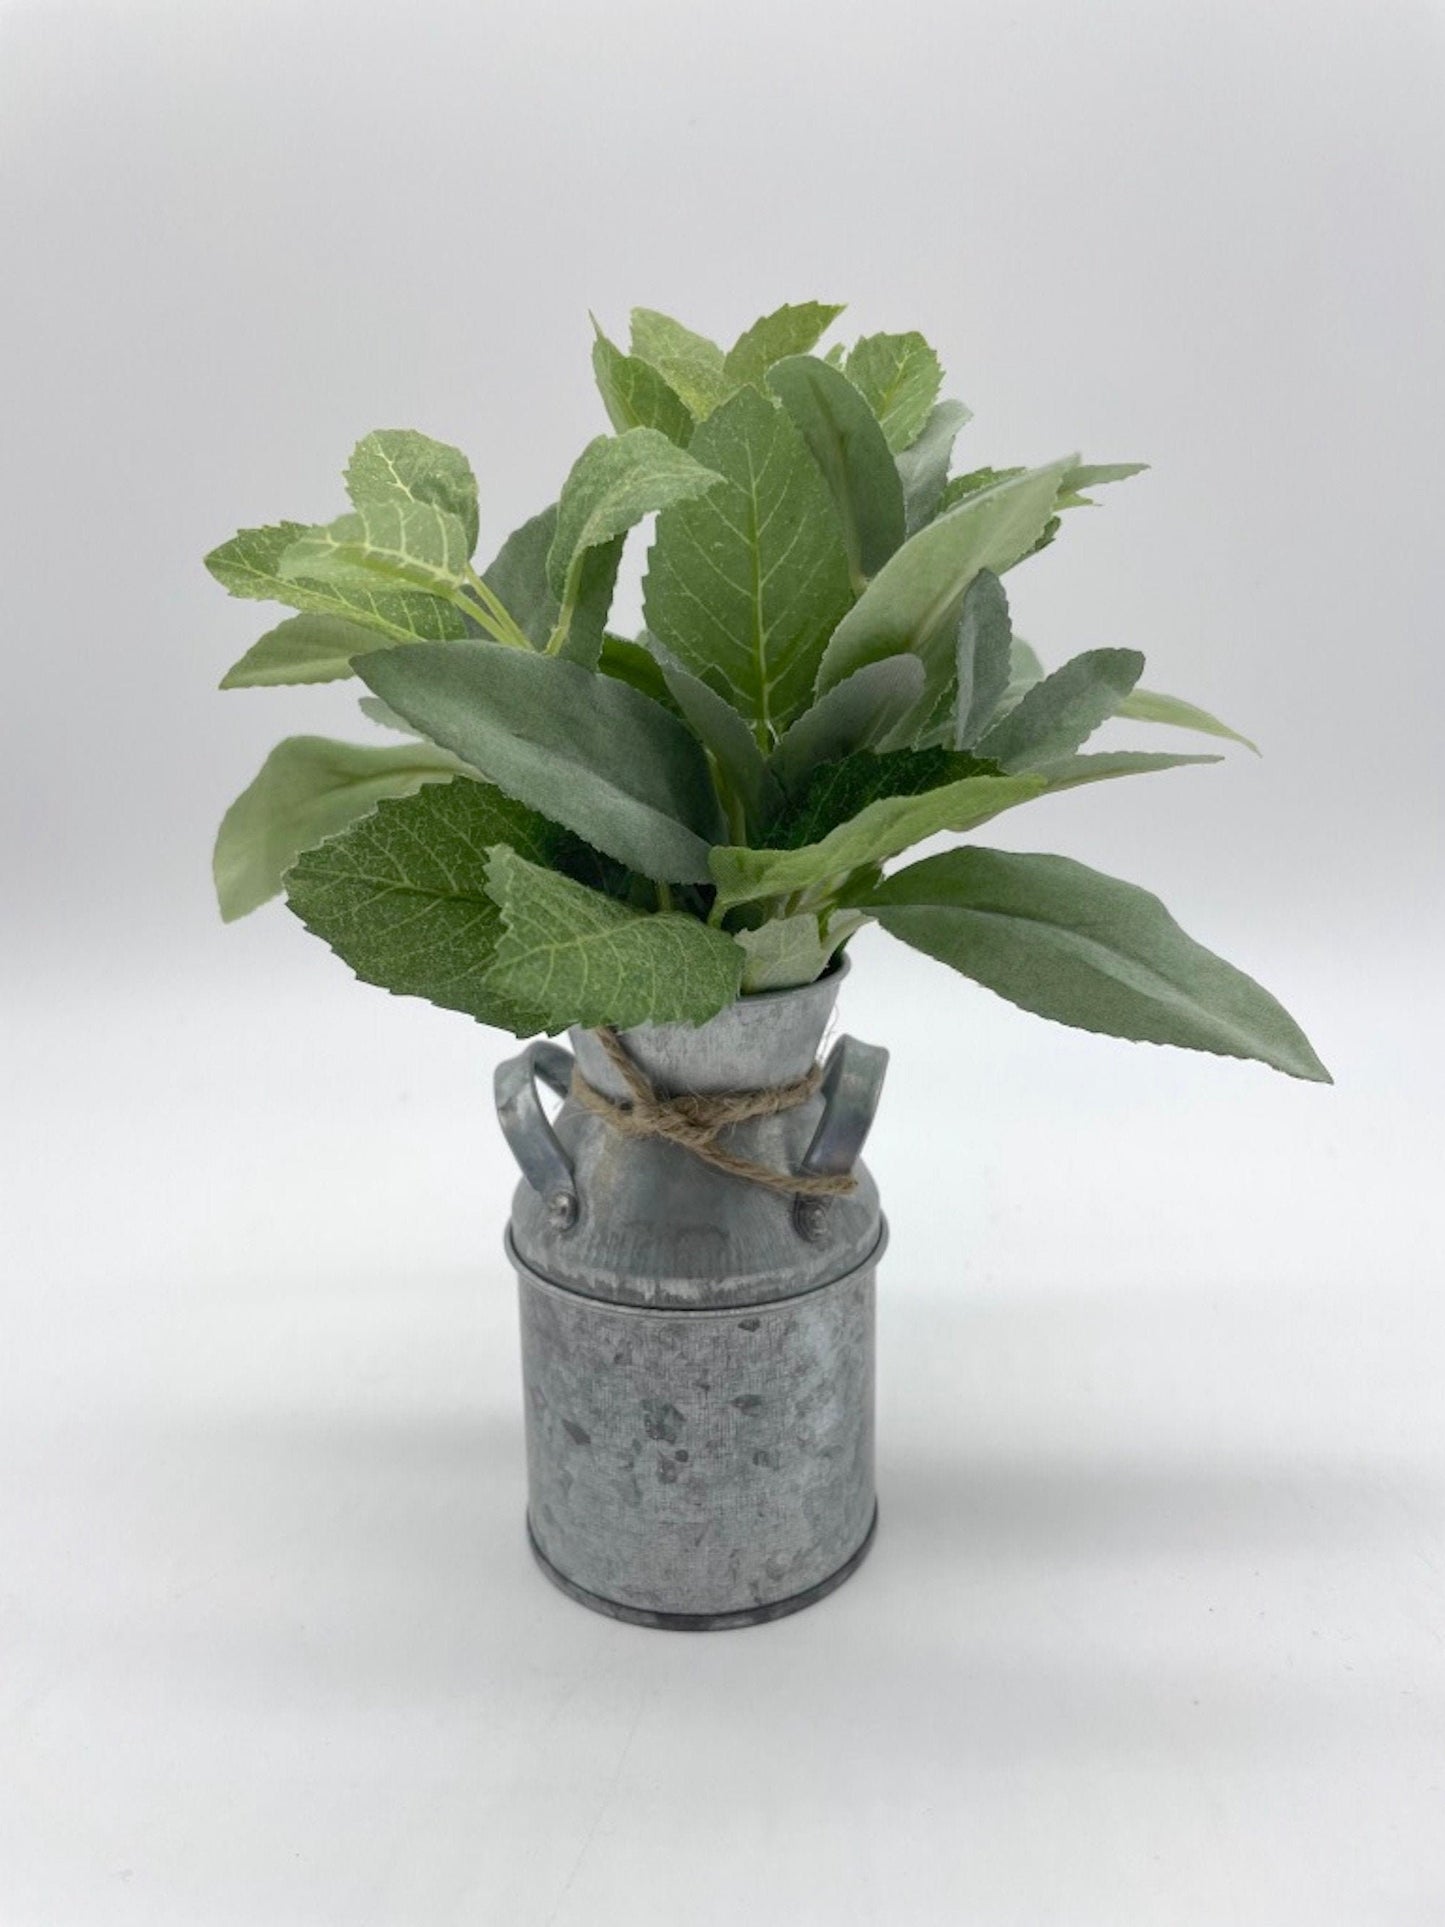 Mini Fake Plant in Metal Vase, Artificial Mint Sage Tiered Tray Decor, Faux Herb Arrangement